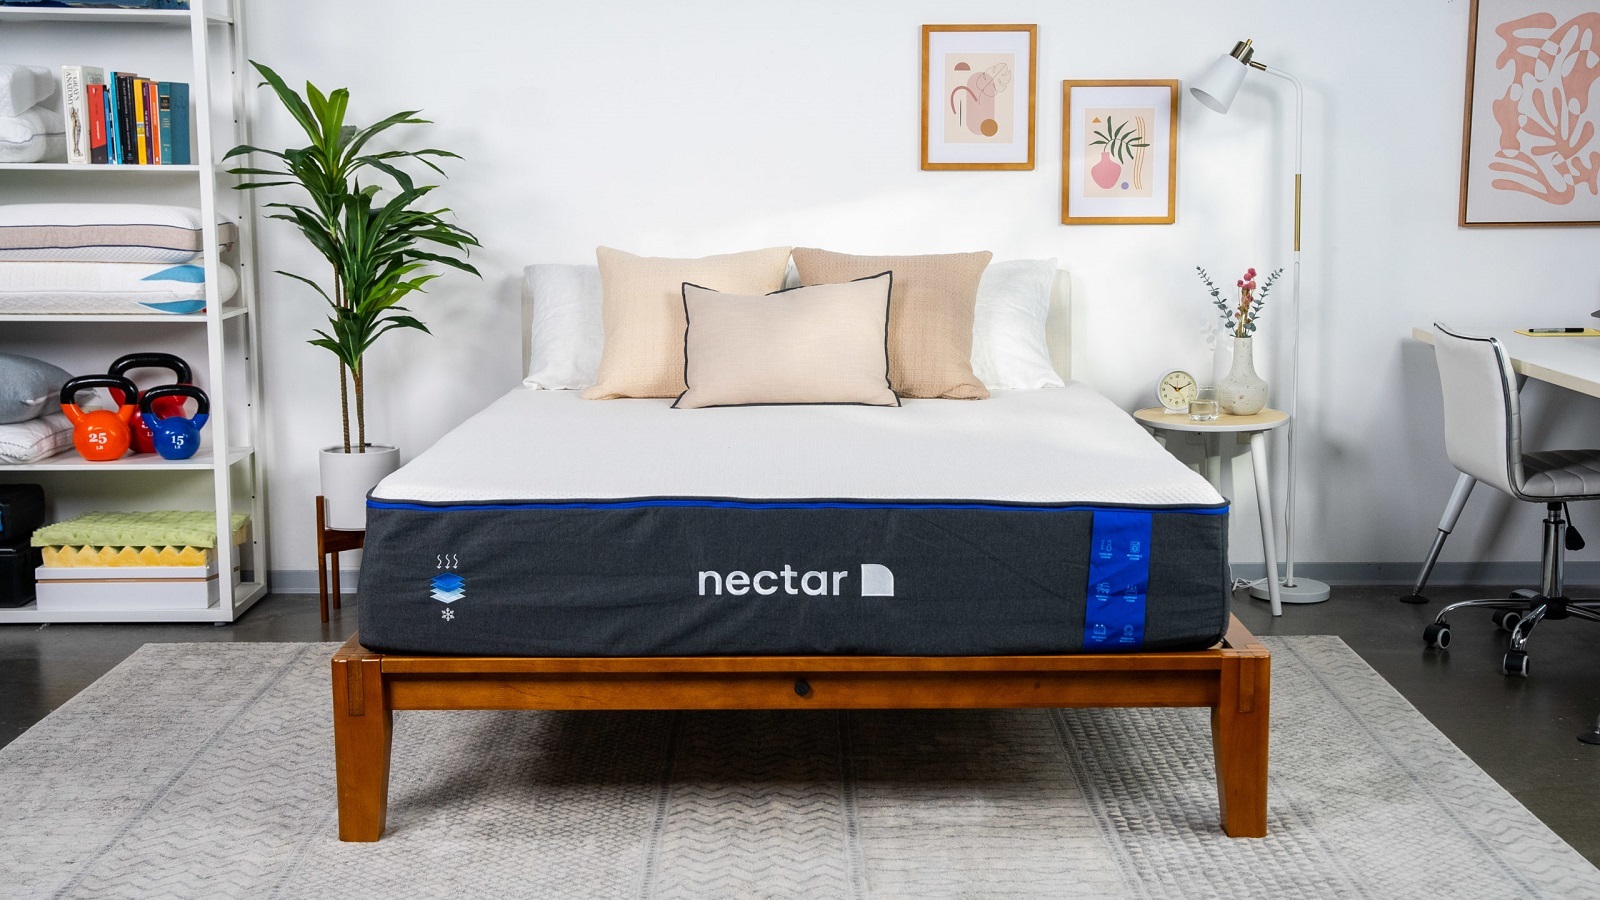 Nectar Adjustable Bed Frame Review: Is It The Best Buy?